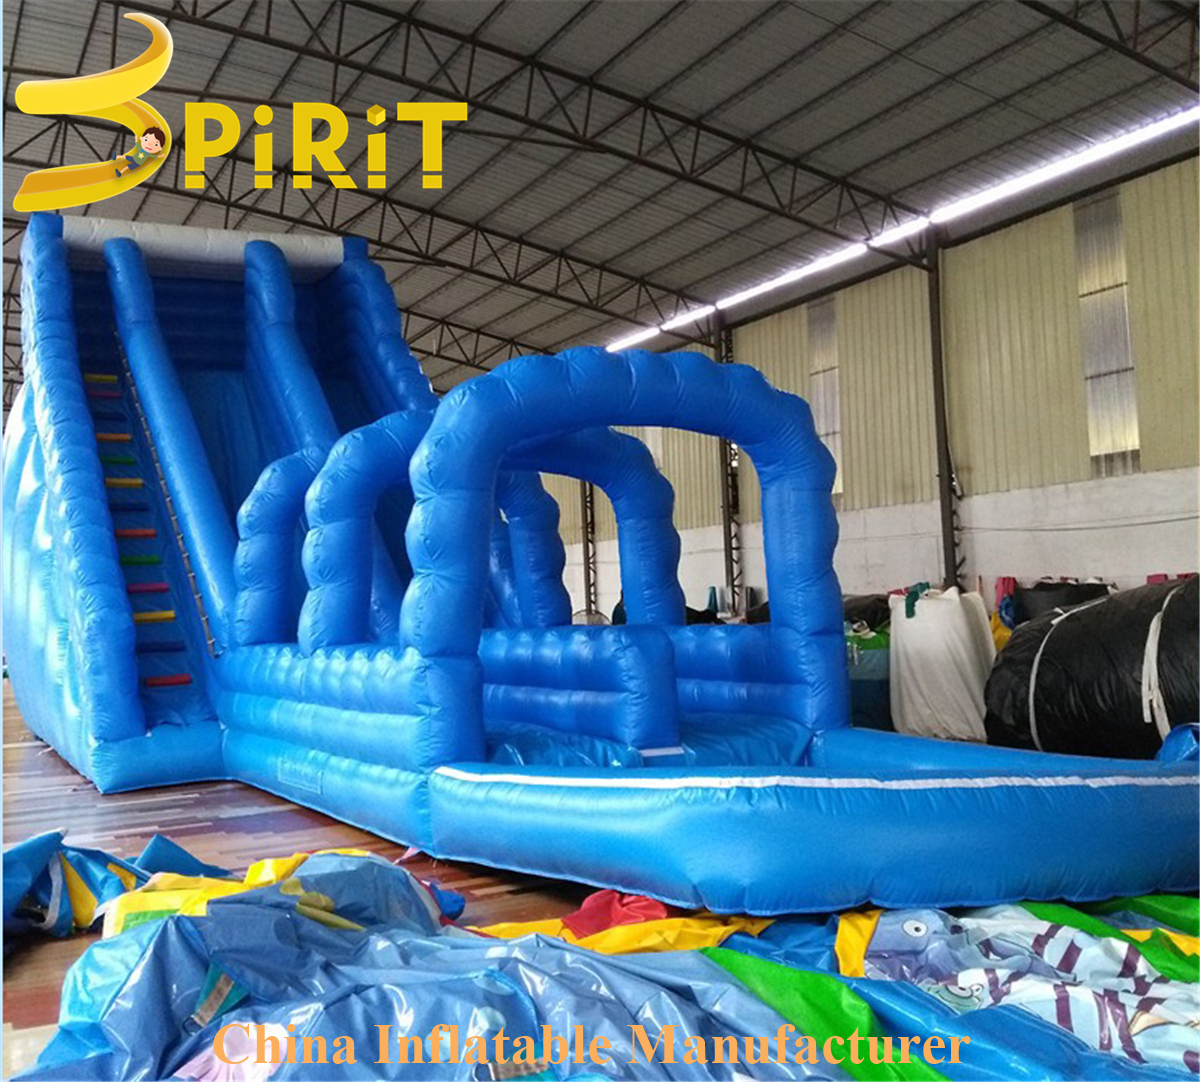 How much does inflatable water slides for sale Australia cost?-SPIRIT PLAY,Outdoor Playground, Indoor Playground,Trampoline Park,Outdoor Fitness,Inflatable,Soft Playground,Ninja Warrior,Trampoline Park,Playground Structure,Play Structure,Outdoor Fitness,Water Park,Play System,Freestanding,Interactive,independente ,Inklusibo, Park, Pagsaka sa Bungbong, Dula sa Bata